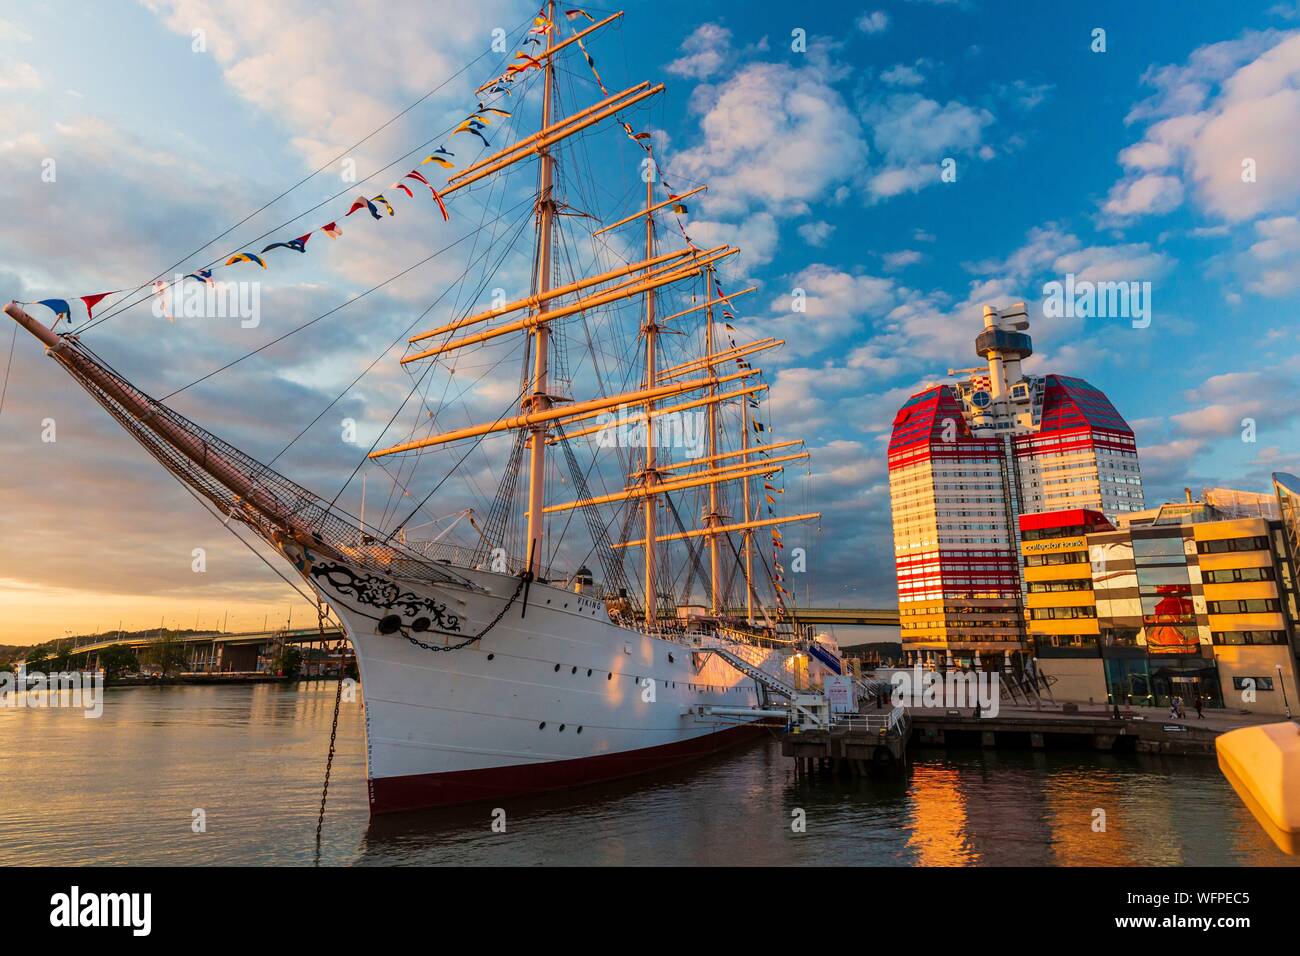 Sweden, Vastra Gotaland, Goteborg (Gothenburg), the skyscraper Gotheborgs-Utkiken and the floating maritime museum with the sailing boat Viking on the Lilla bommens hamm docks Stock Photo